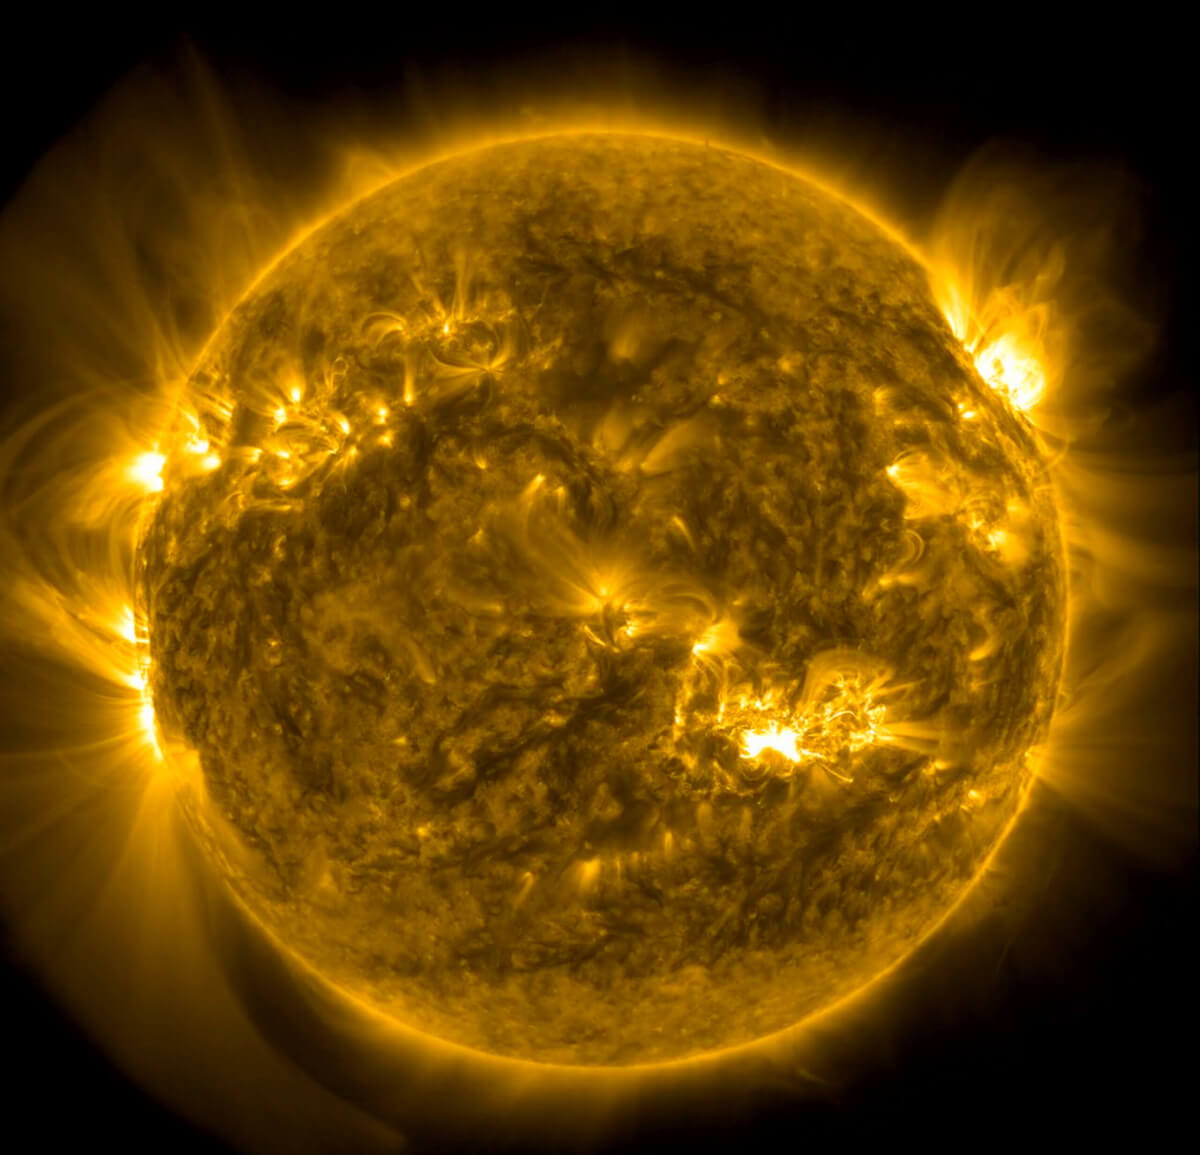 Image captured by NASA's Solar Dynamics Observatory (SDO) spacecraft shows the solar flare from the Sun's sunspot.